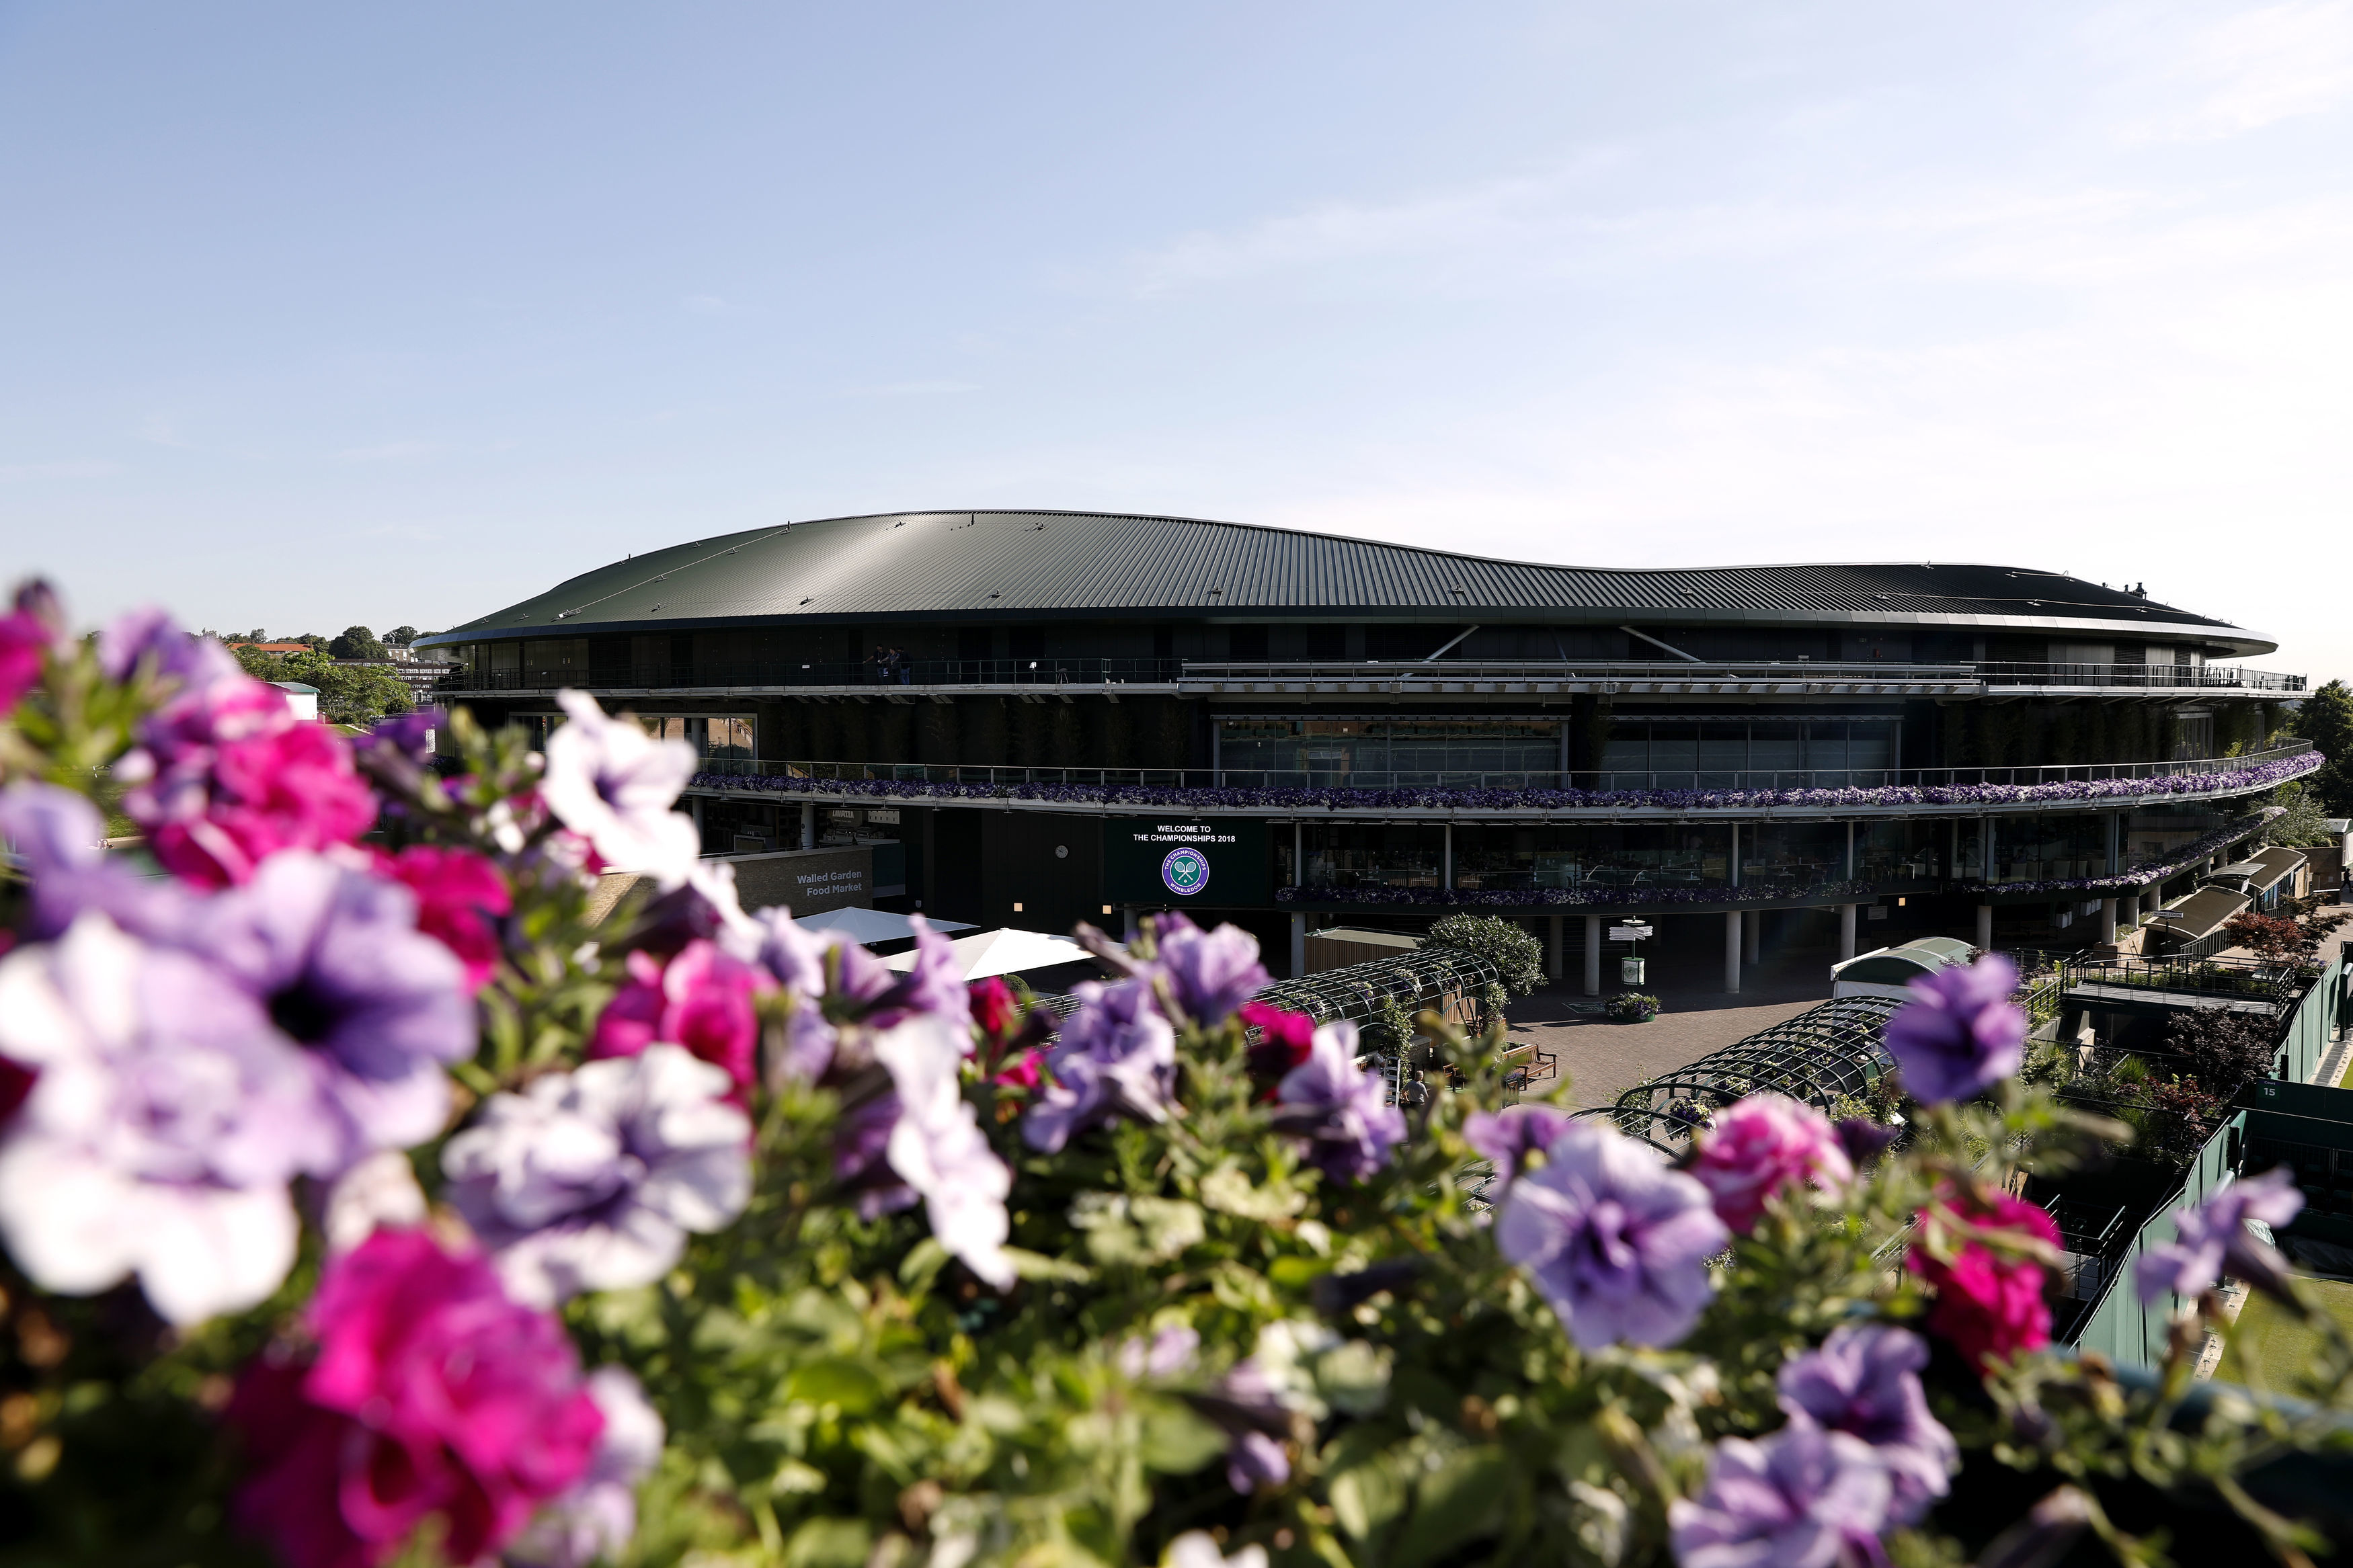 General view across the grounds towards court one on day one of the Wimbledon Championships at the All England Lawn Tennis and Croquet Club